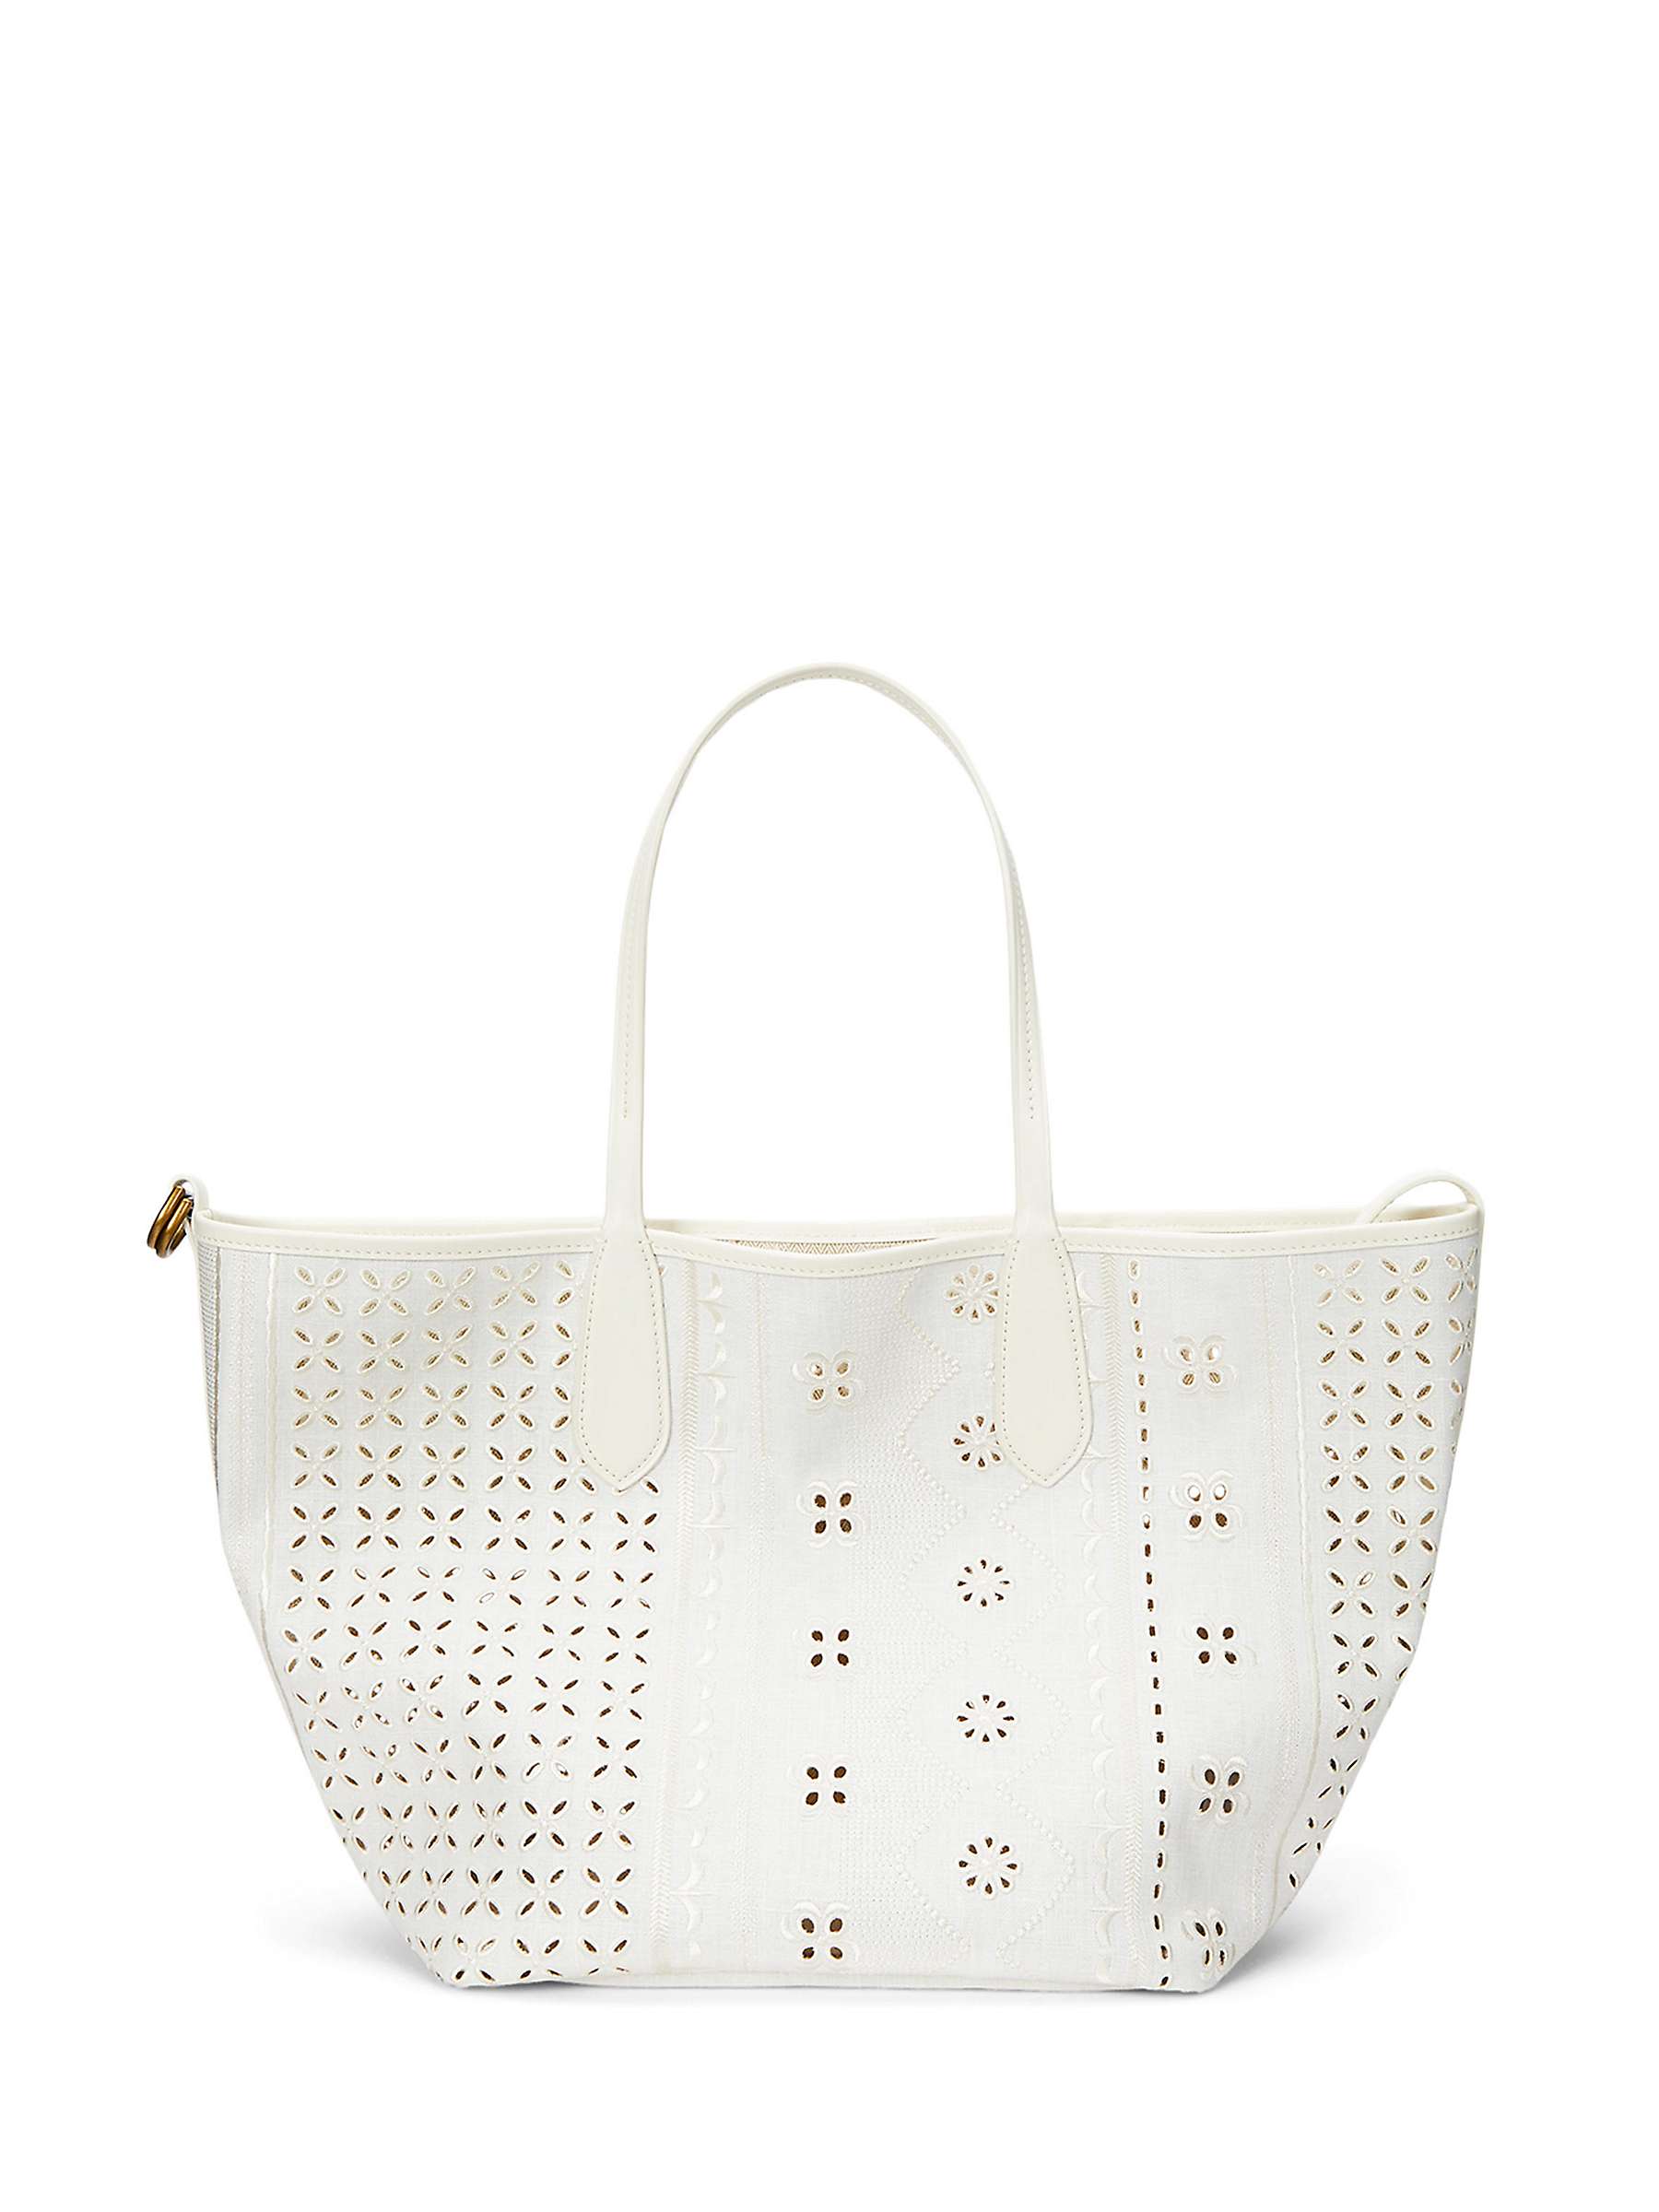 Buy Polo Ralph Lauren Bellport Embroidered Eyelet Tote Bag, White Online at johnlewis.com